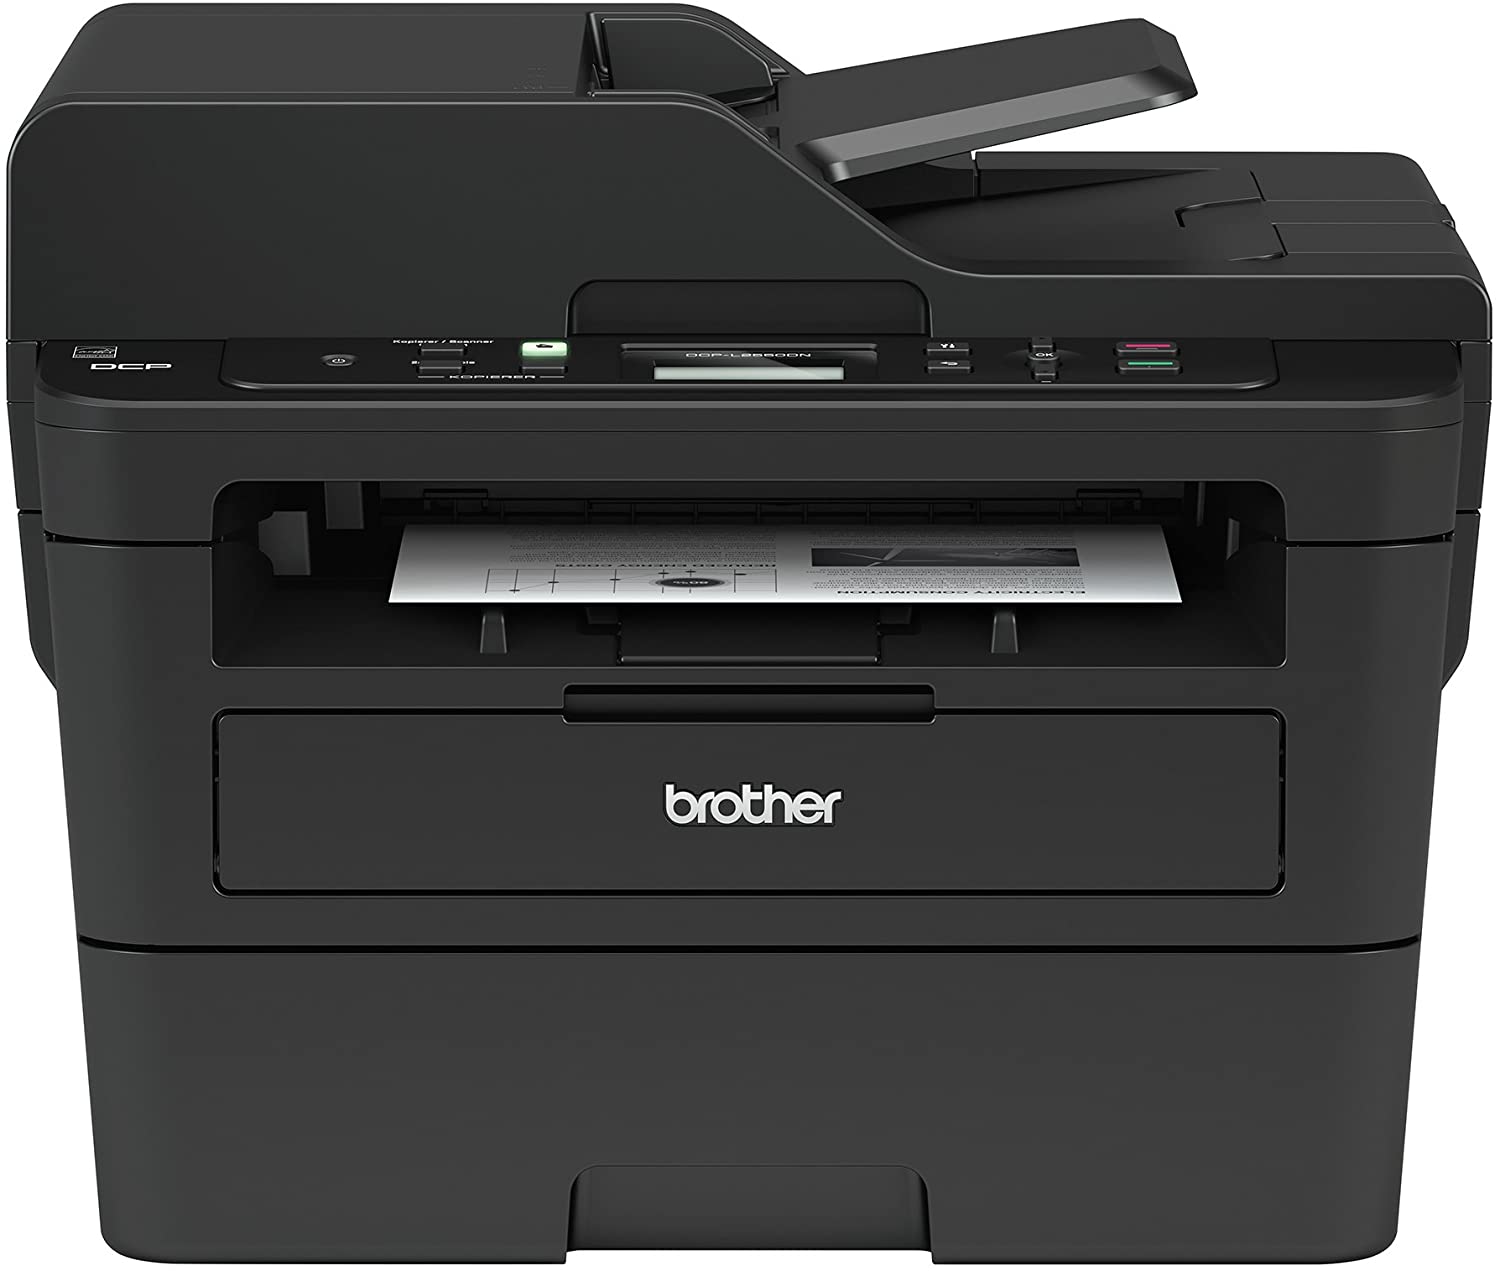 Brother DCP-L2550DW All-in-One Monochrome Mobile ready Laser Printer